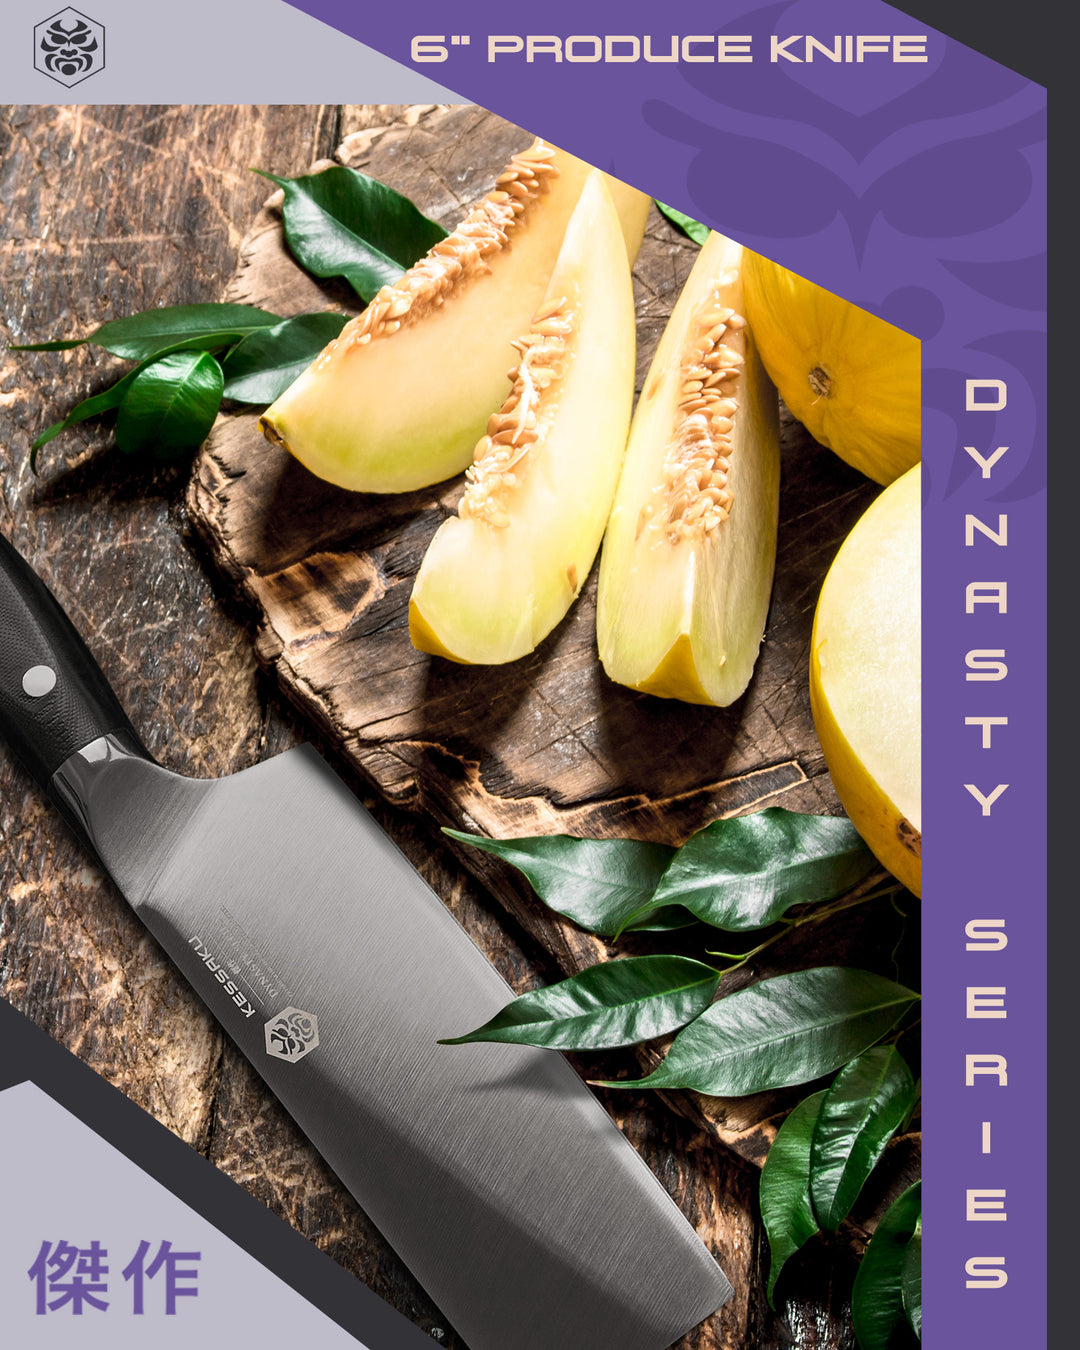 The Dynasty Knife makes working with large fruit effortless